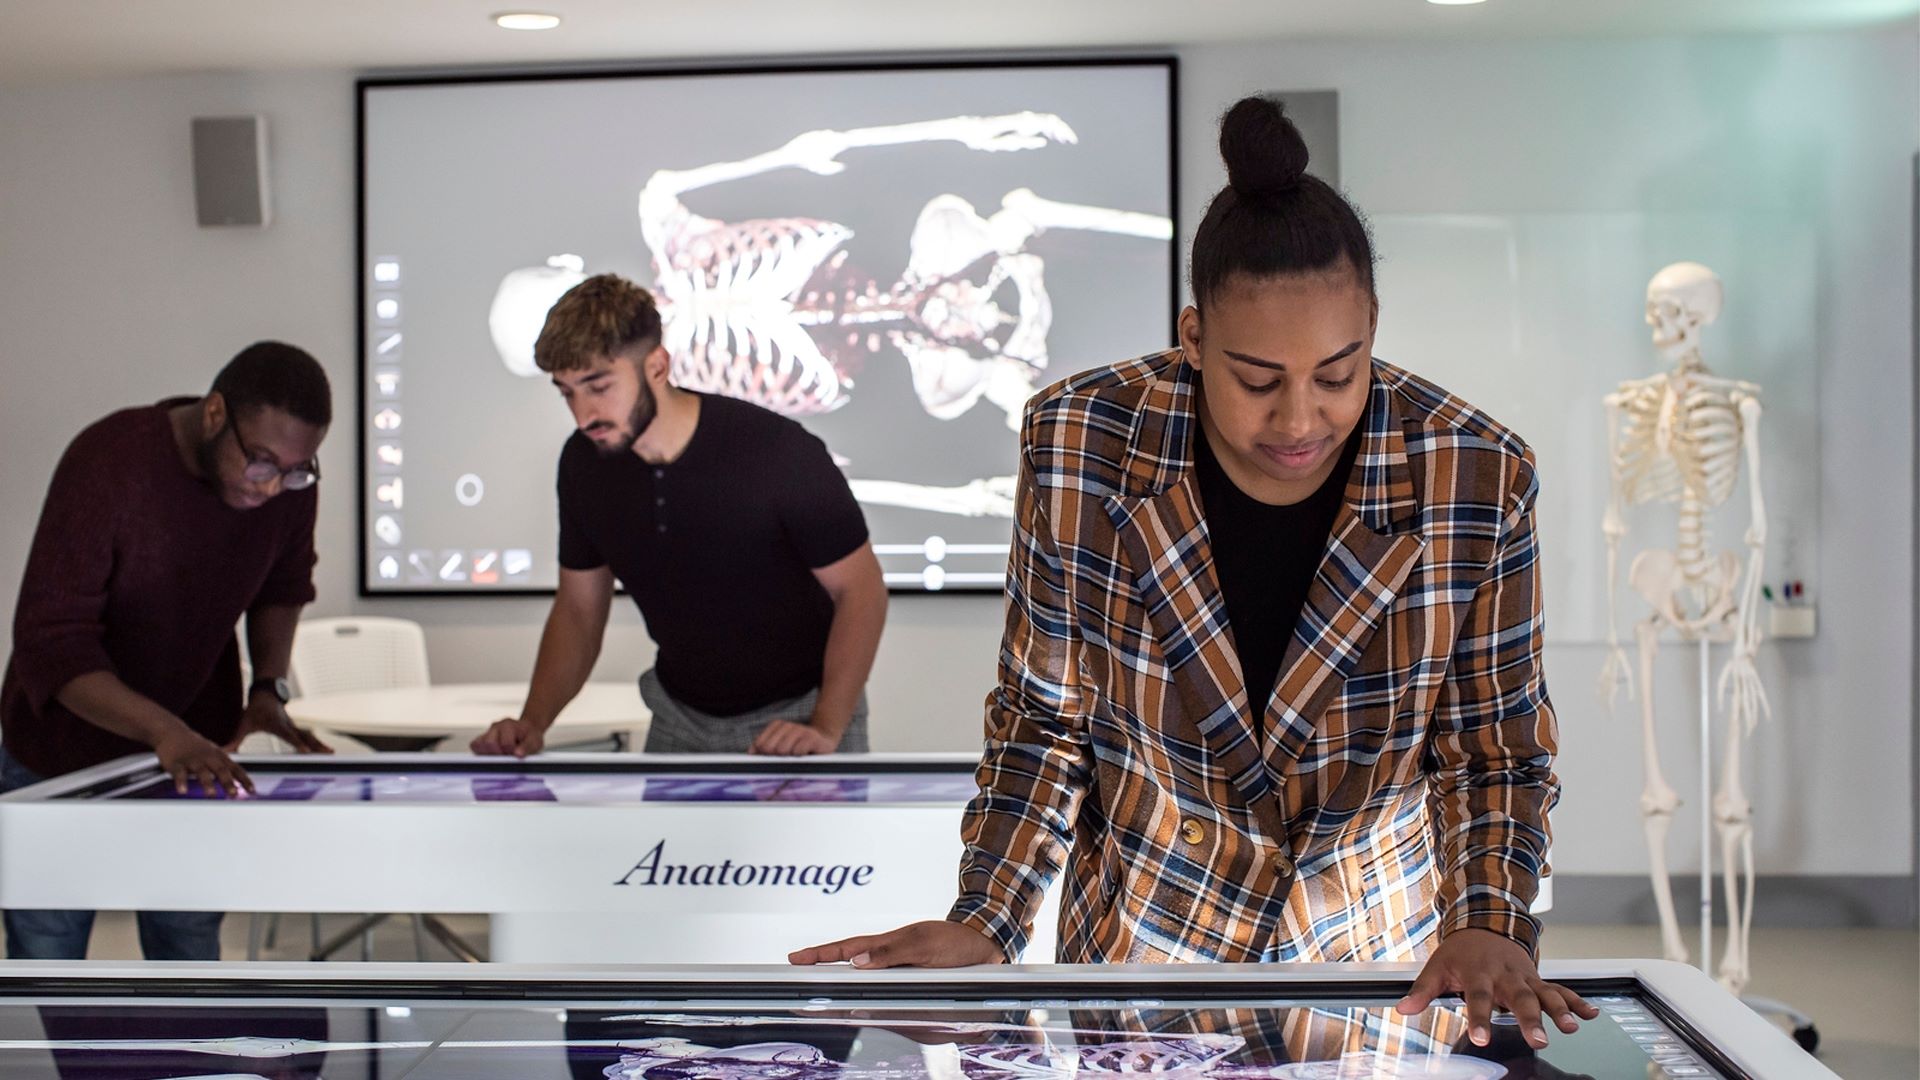 Students use the Anatomage Tables in the anatomy and ultrasound research centre.